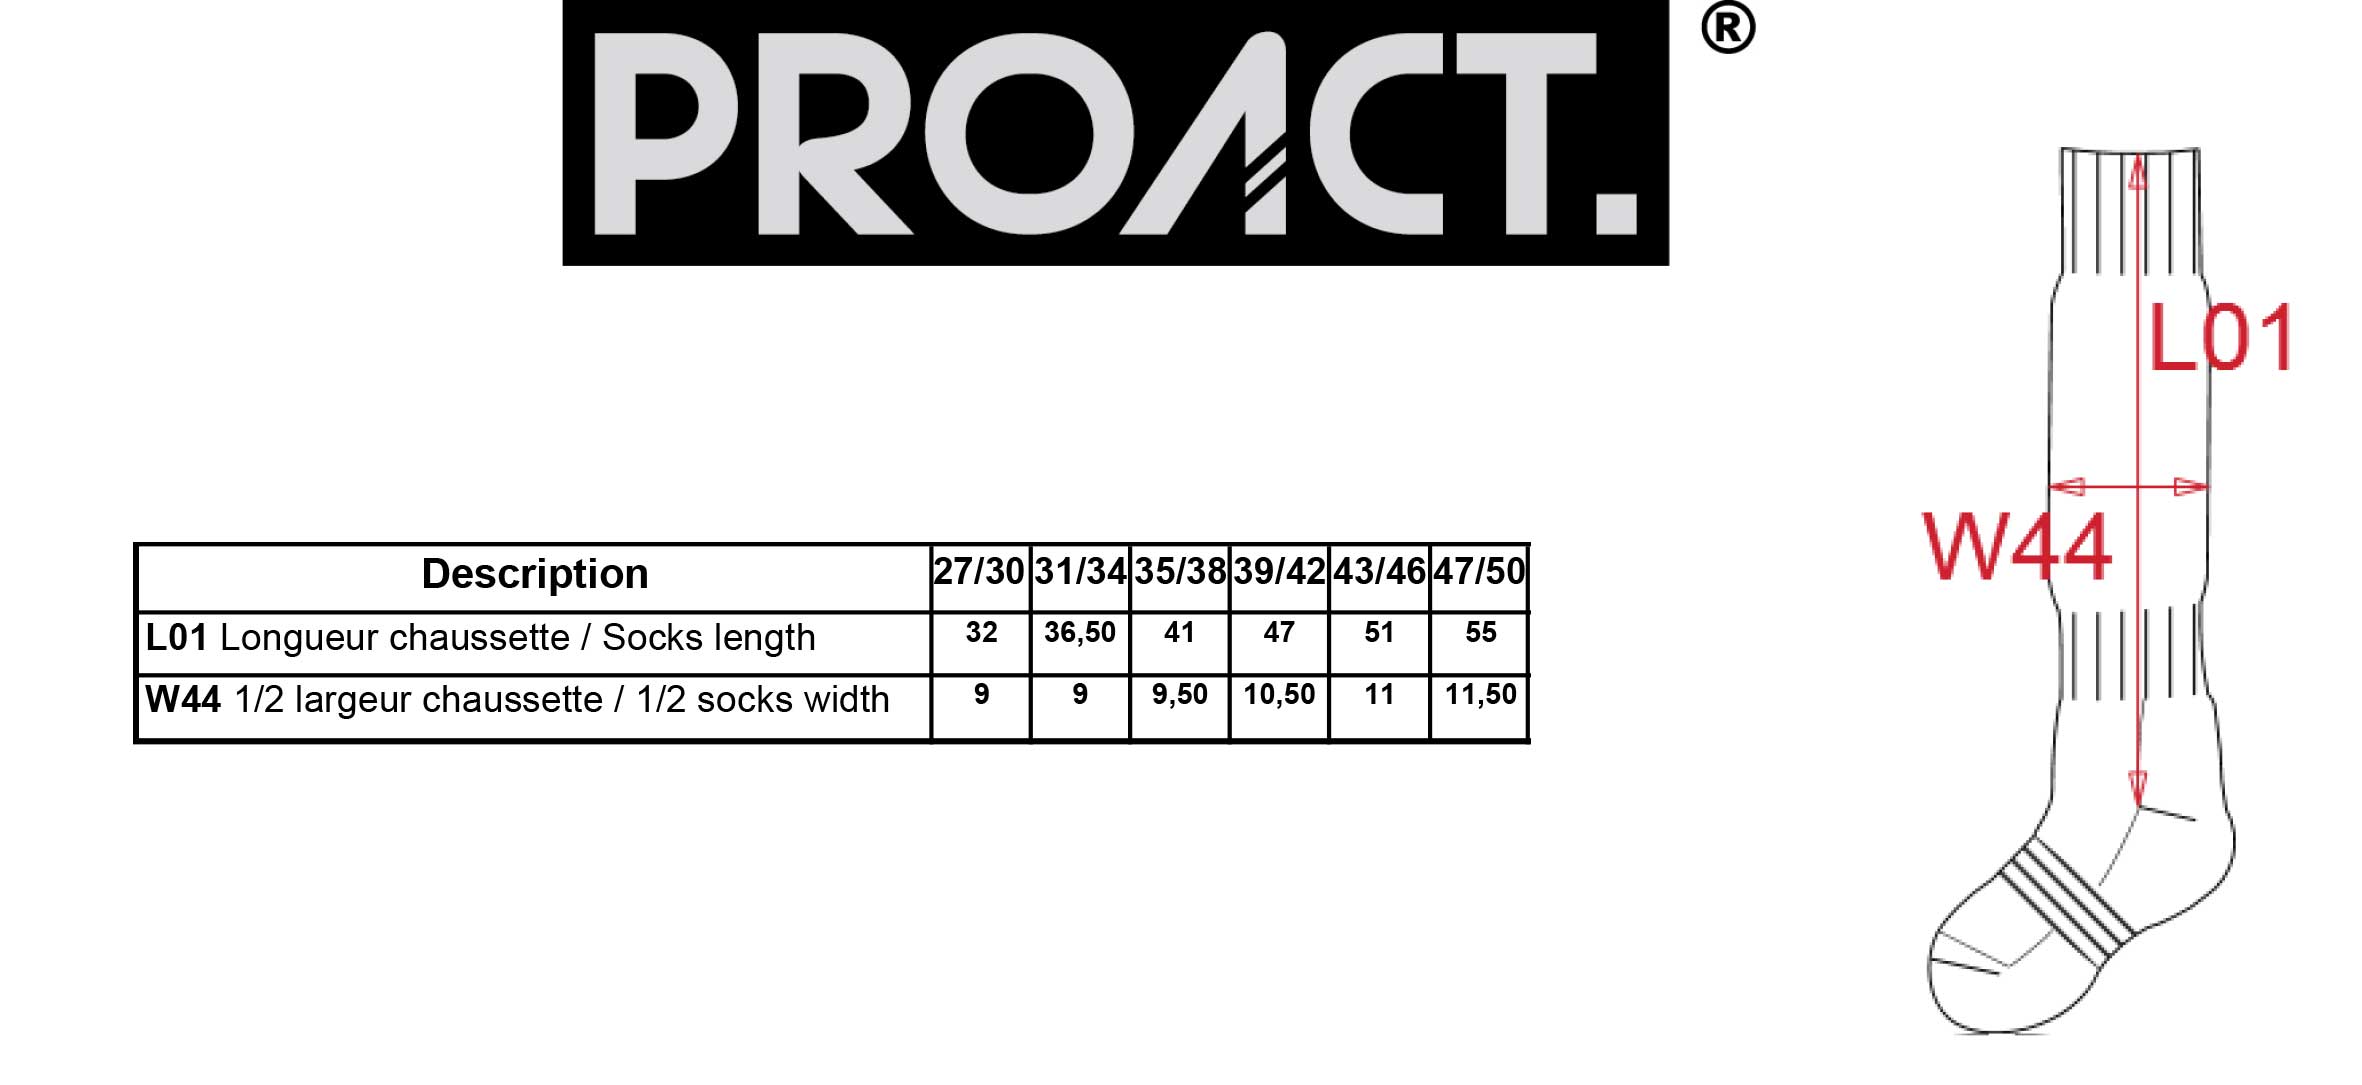 Size matching for Proact socks